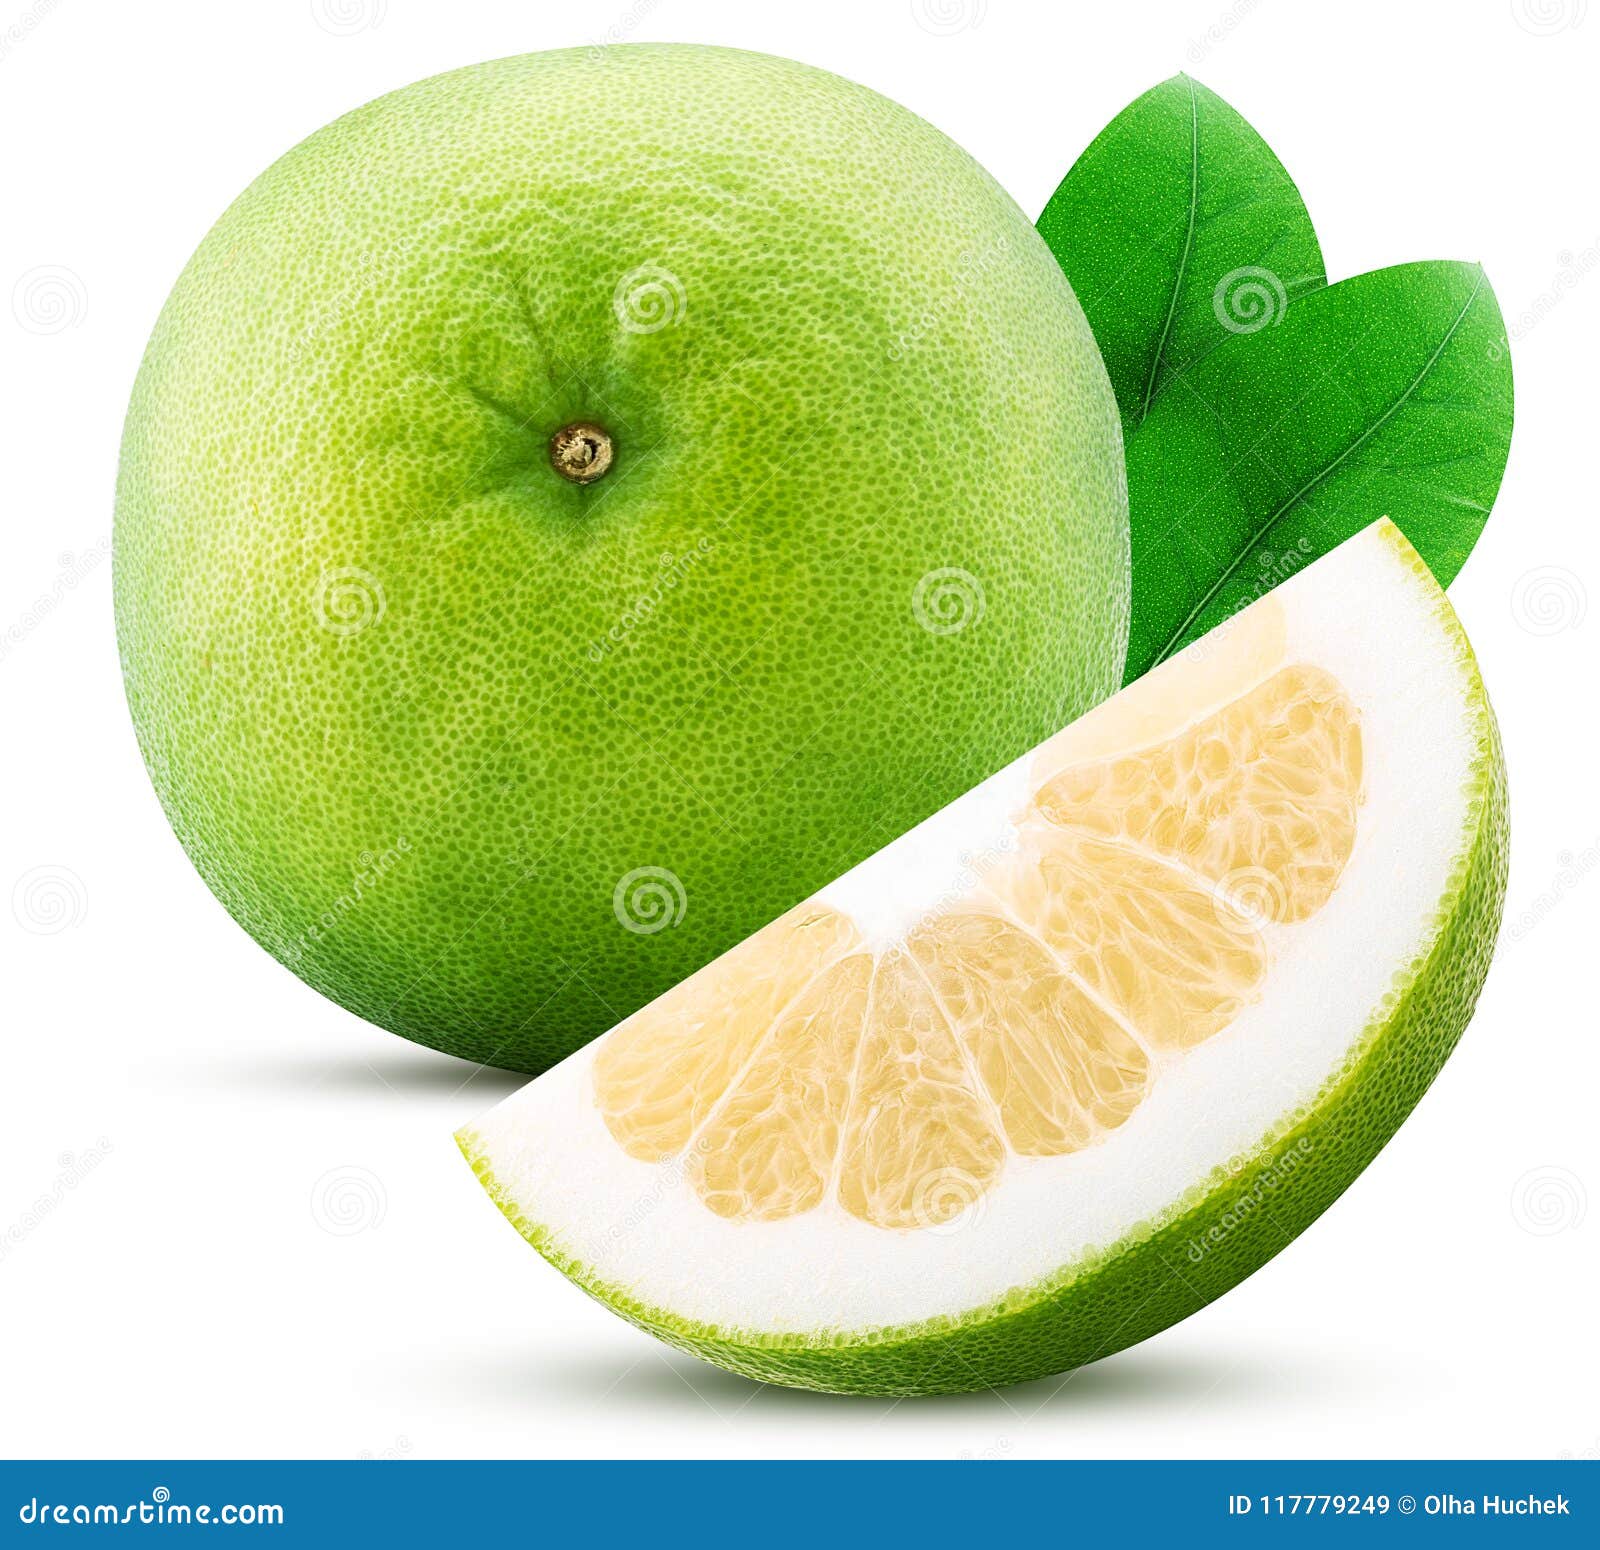 Sweetie Citrus Fruit And Slice With Leaf Stock Image - Image of ...